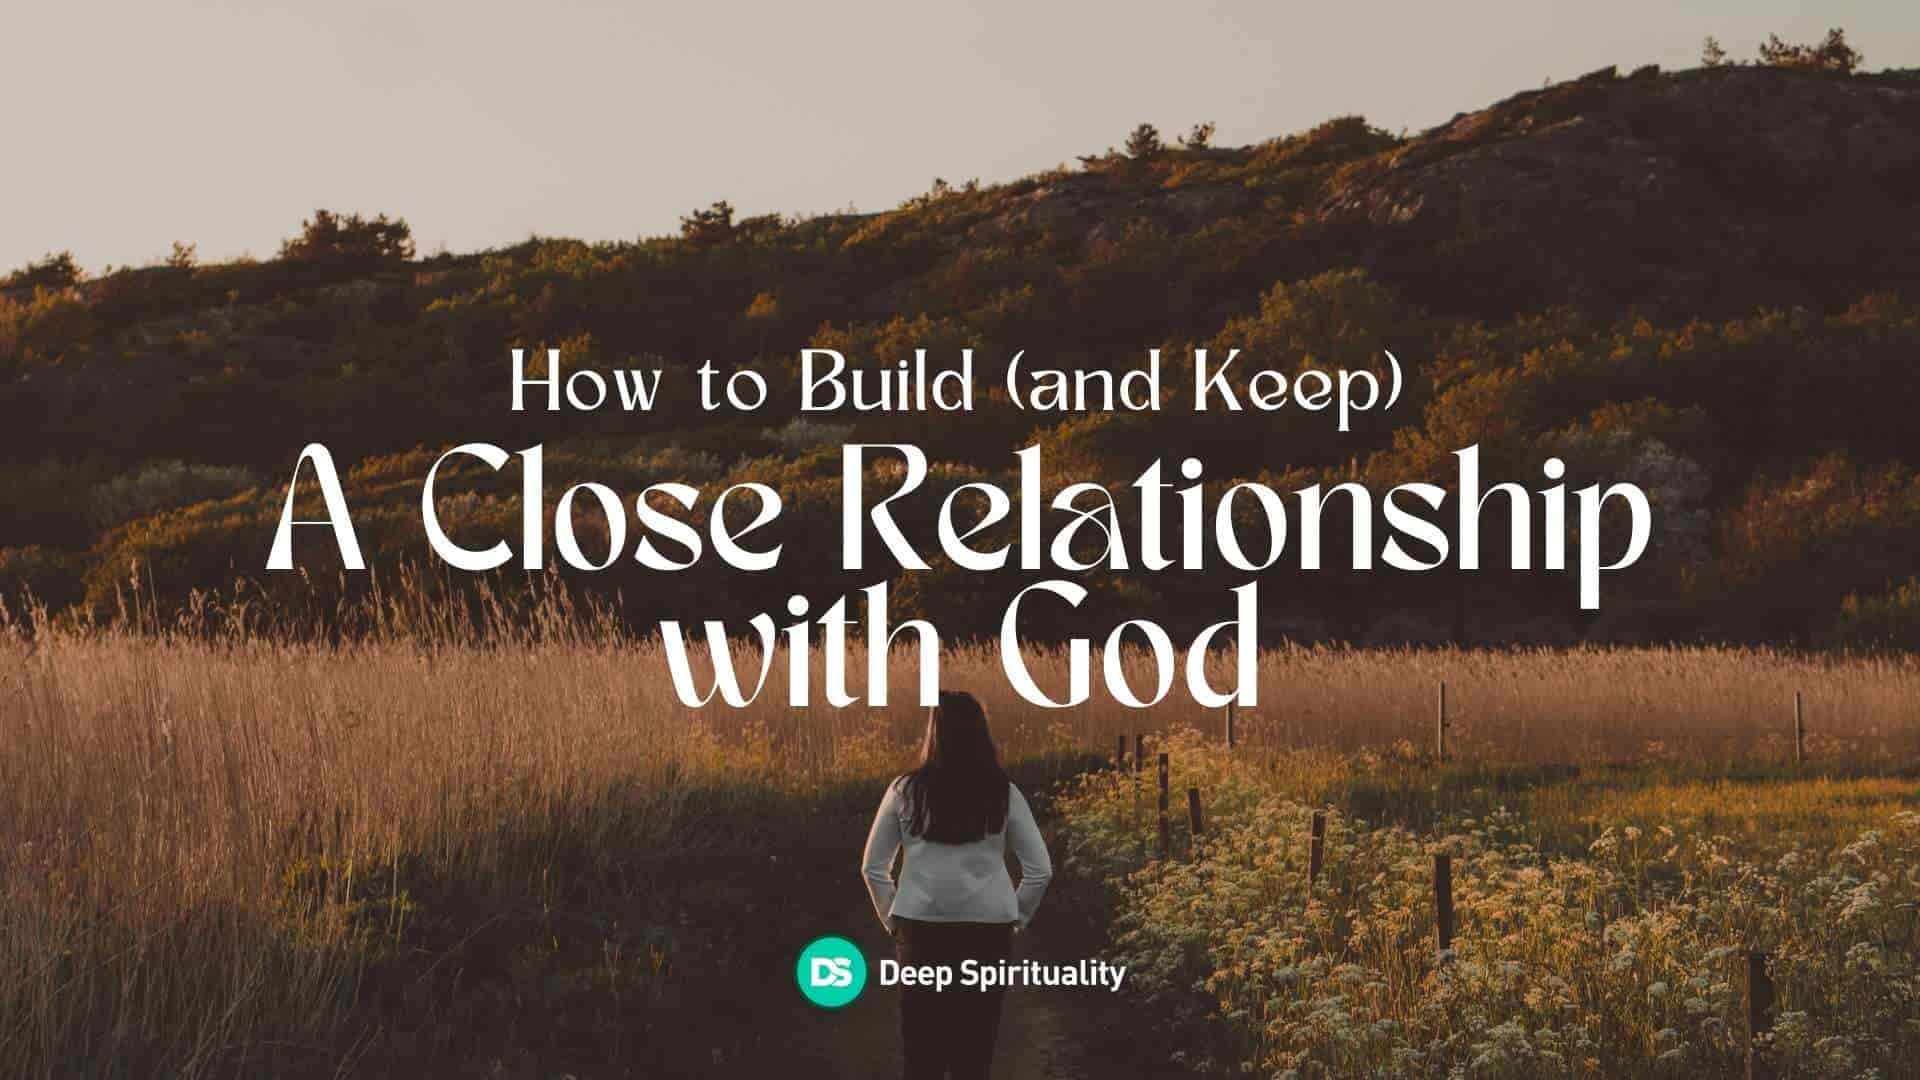 How to Build (and Keep) a Close Relationship with God  3